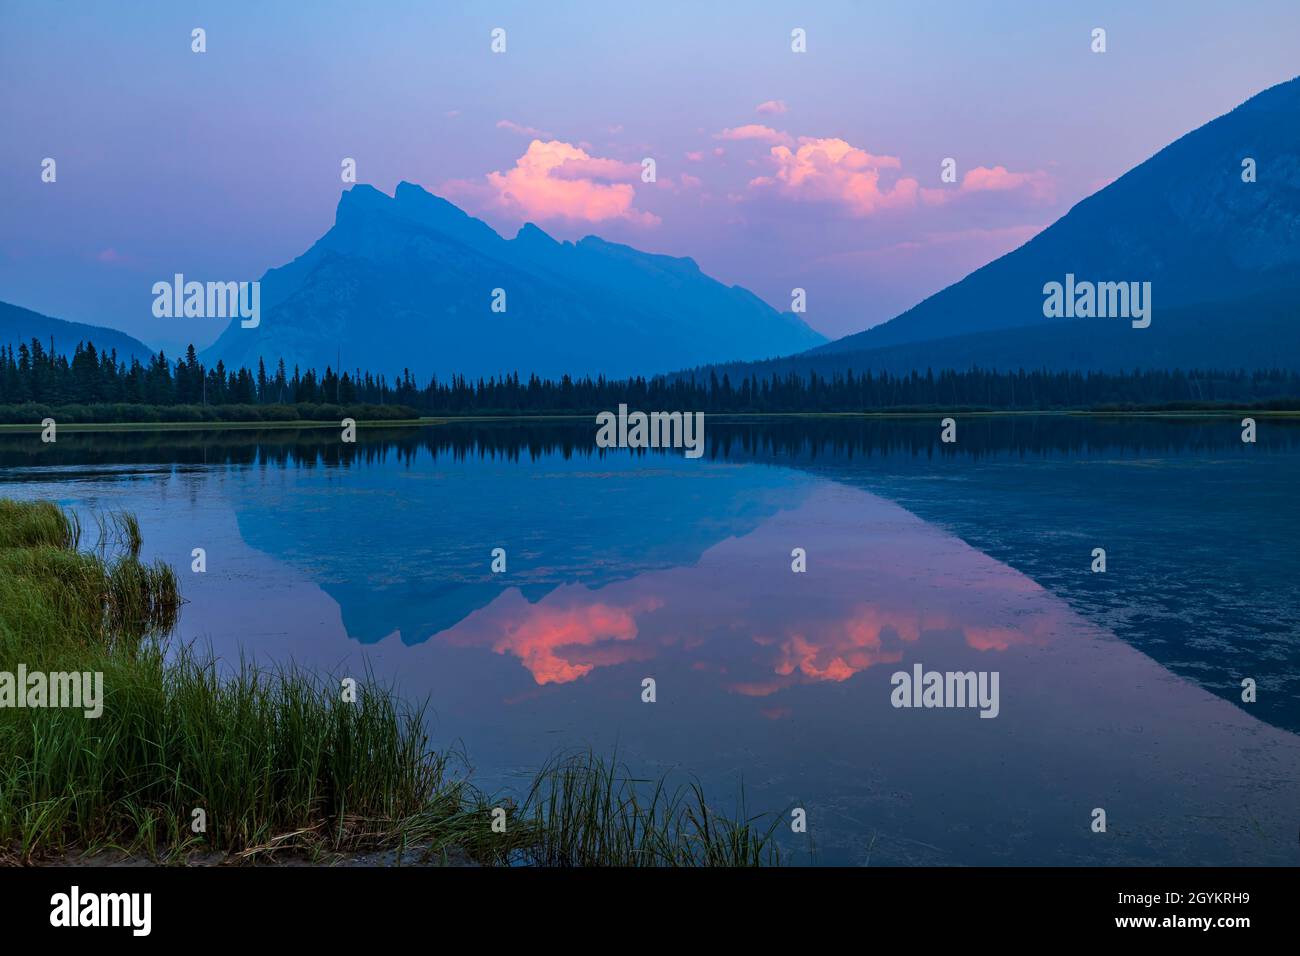 Sunset at Vermilion Lakes, Banff, Alberta, over Mt. Rundle reflected in the still waters, on an evening with a smoke-filled sky from B.C. forest fires Stock Photo